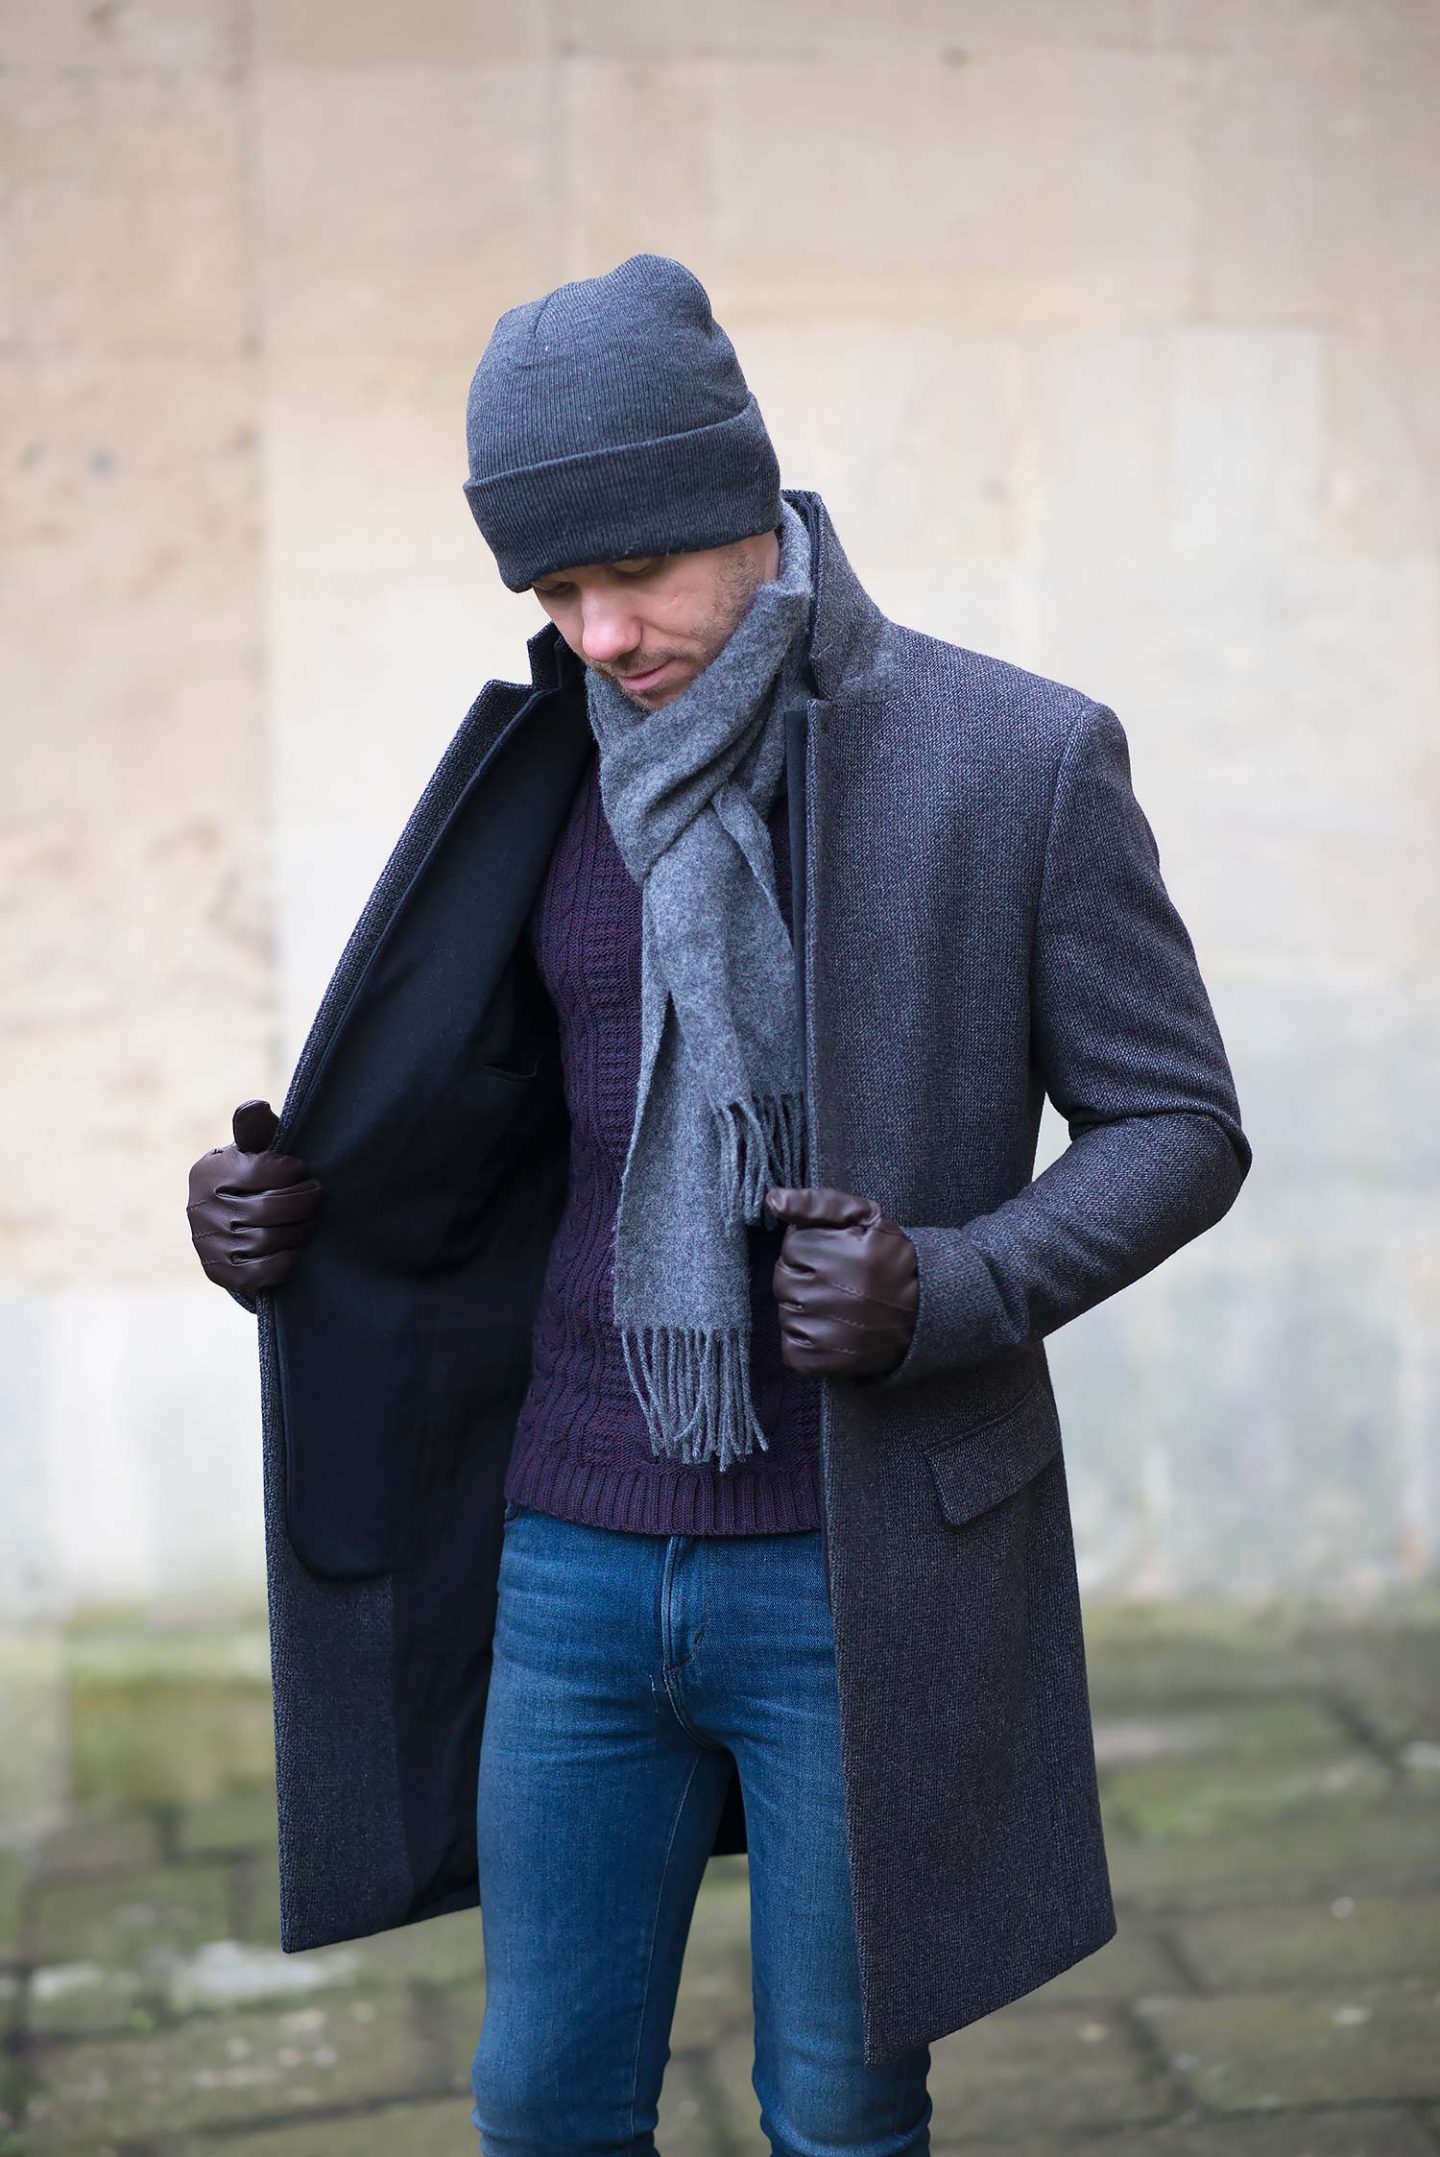 6 Must Have Men’s Coat Styles For Winter Your Average Guy